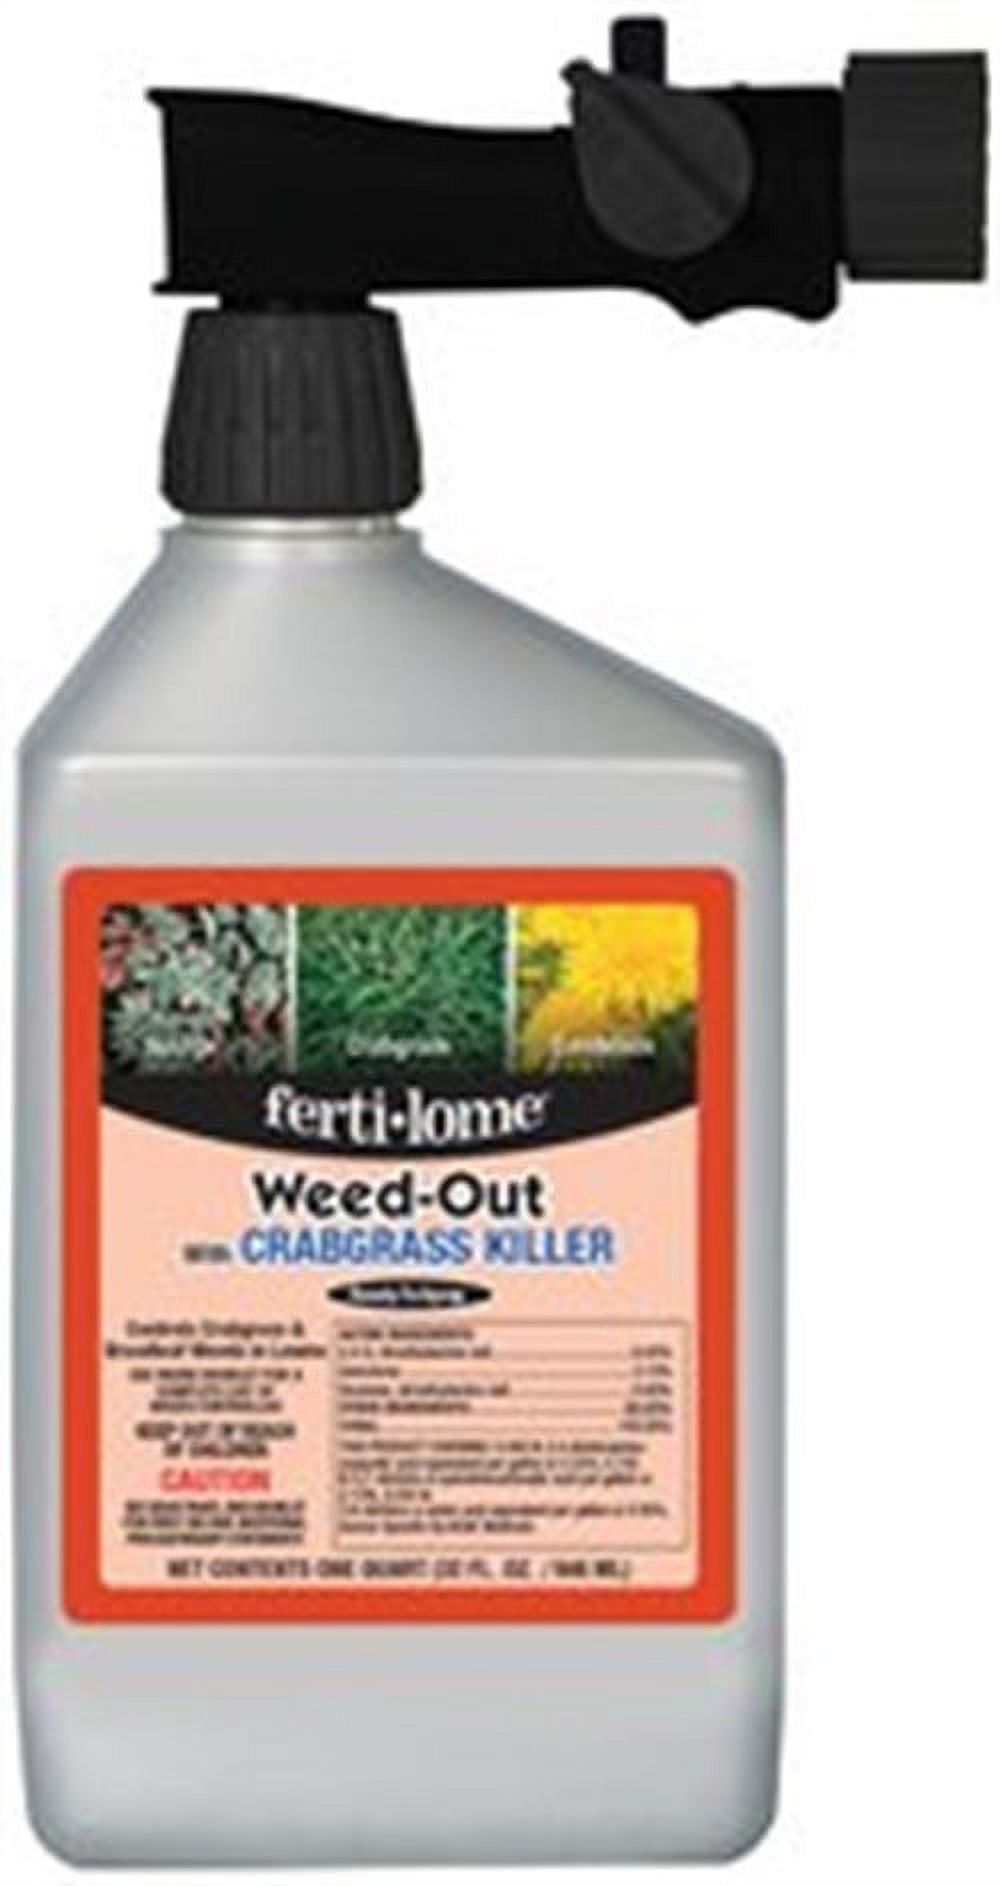 Fertilome Weed-Out with Crabgrass Killer RTS Weed and Crabgrass Killer RTU Liquid 32 oz - image 3 of 5